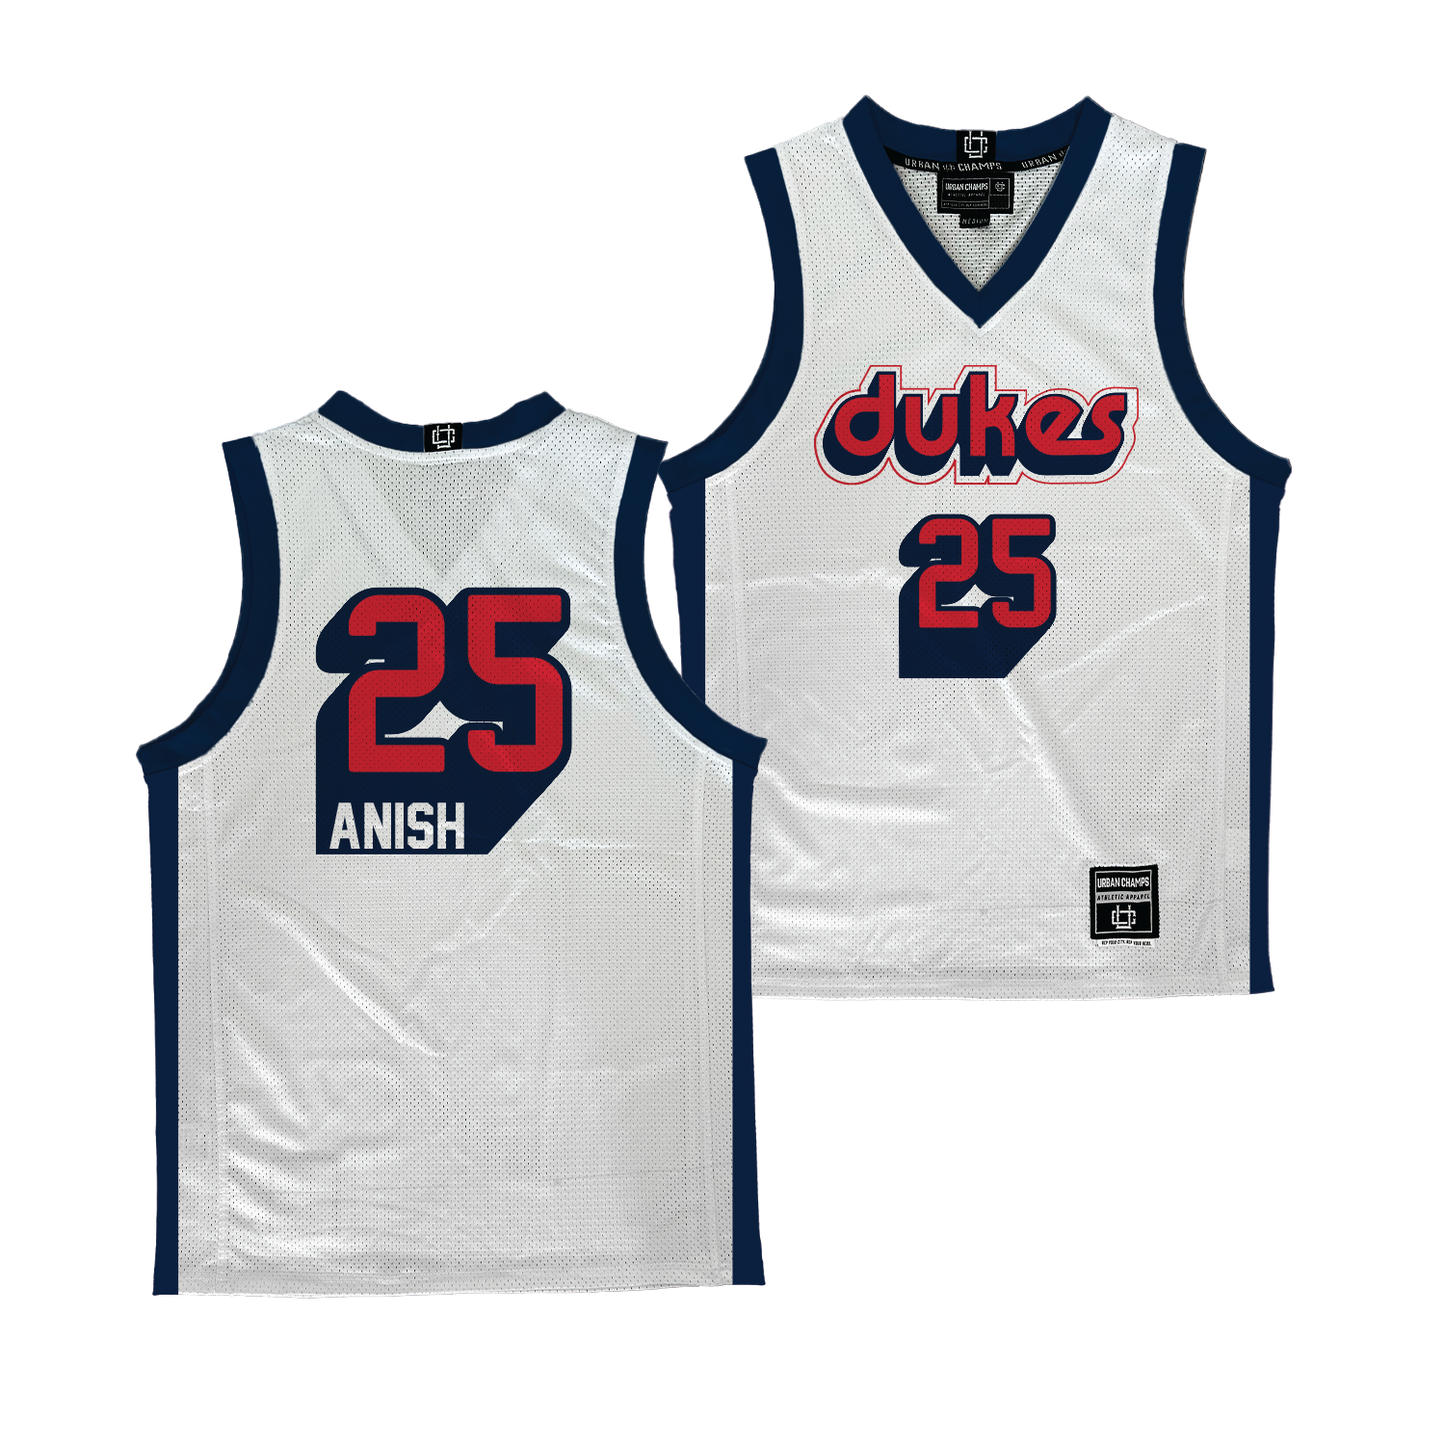 Duquesne Men’s Basketball Throwback Jersey - Ethan Anish | #25